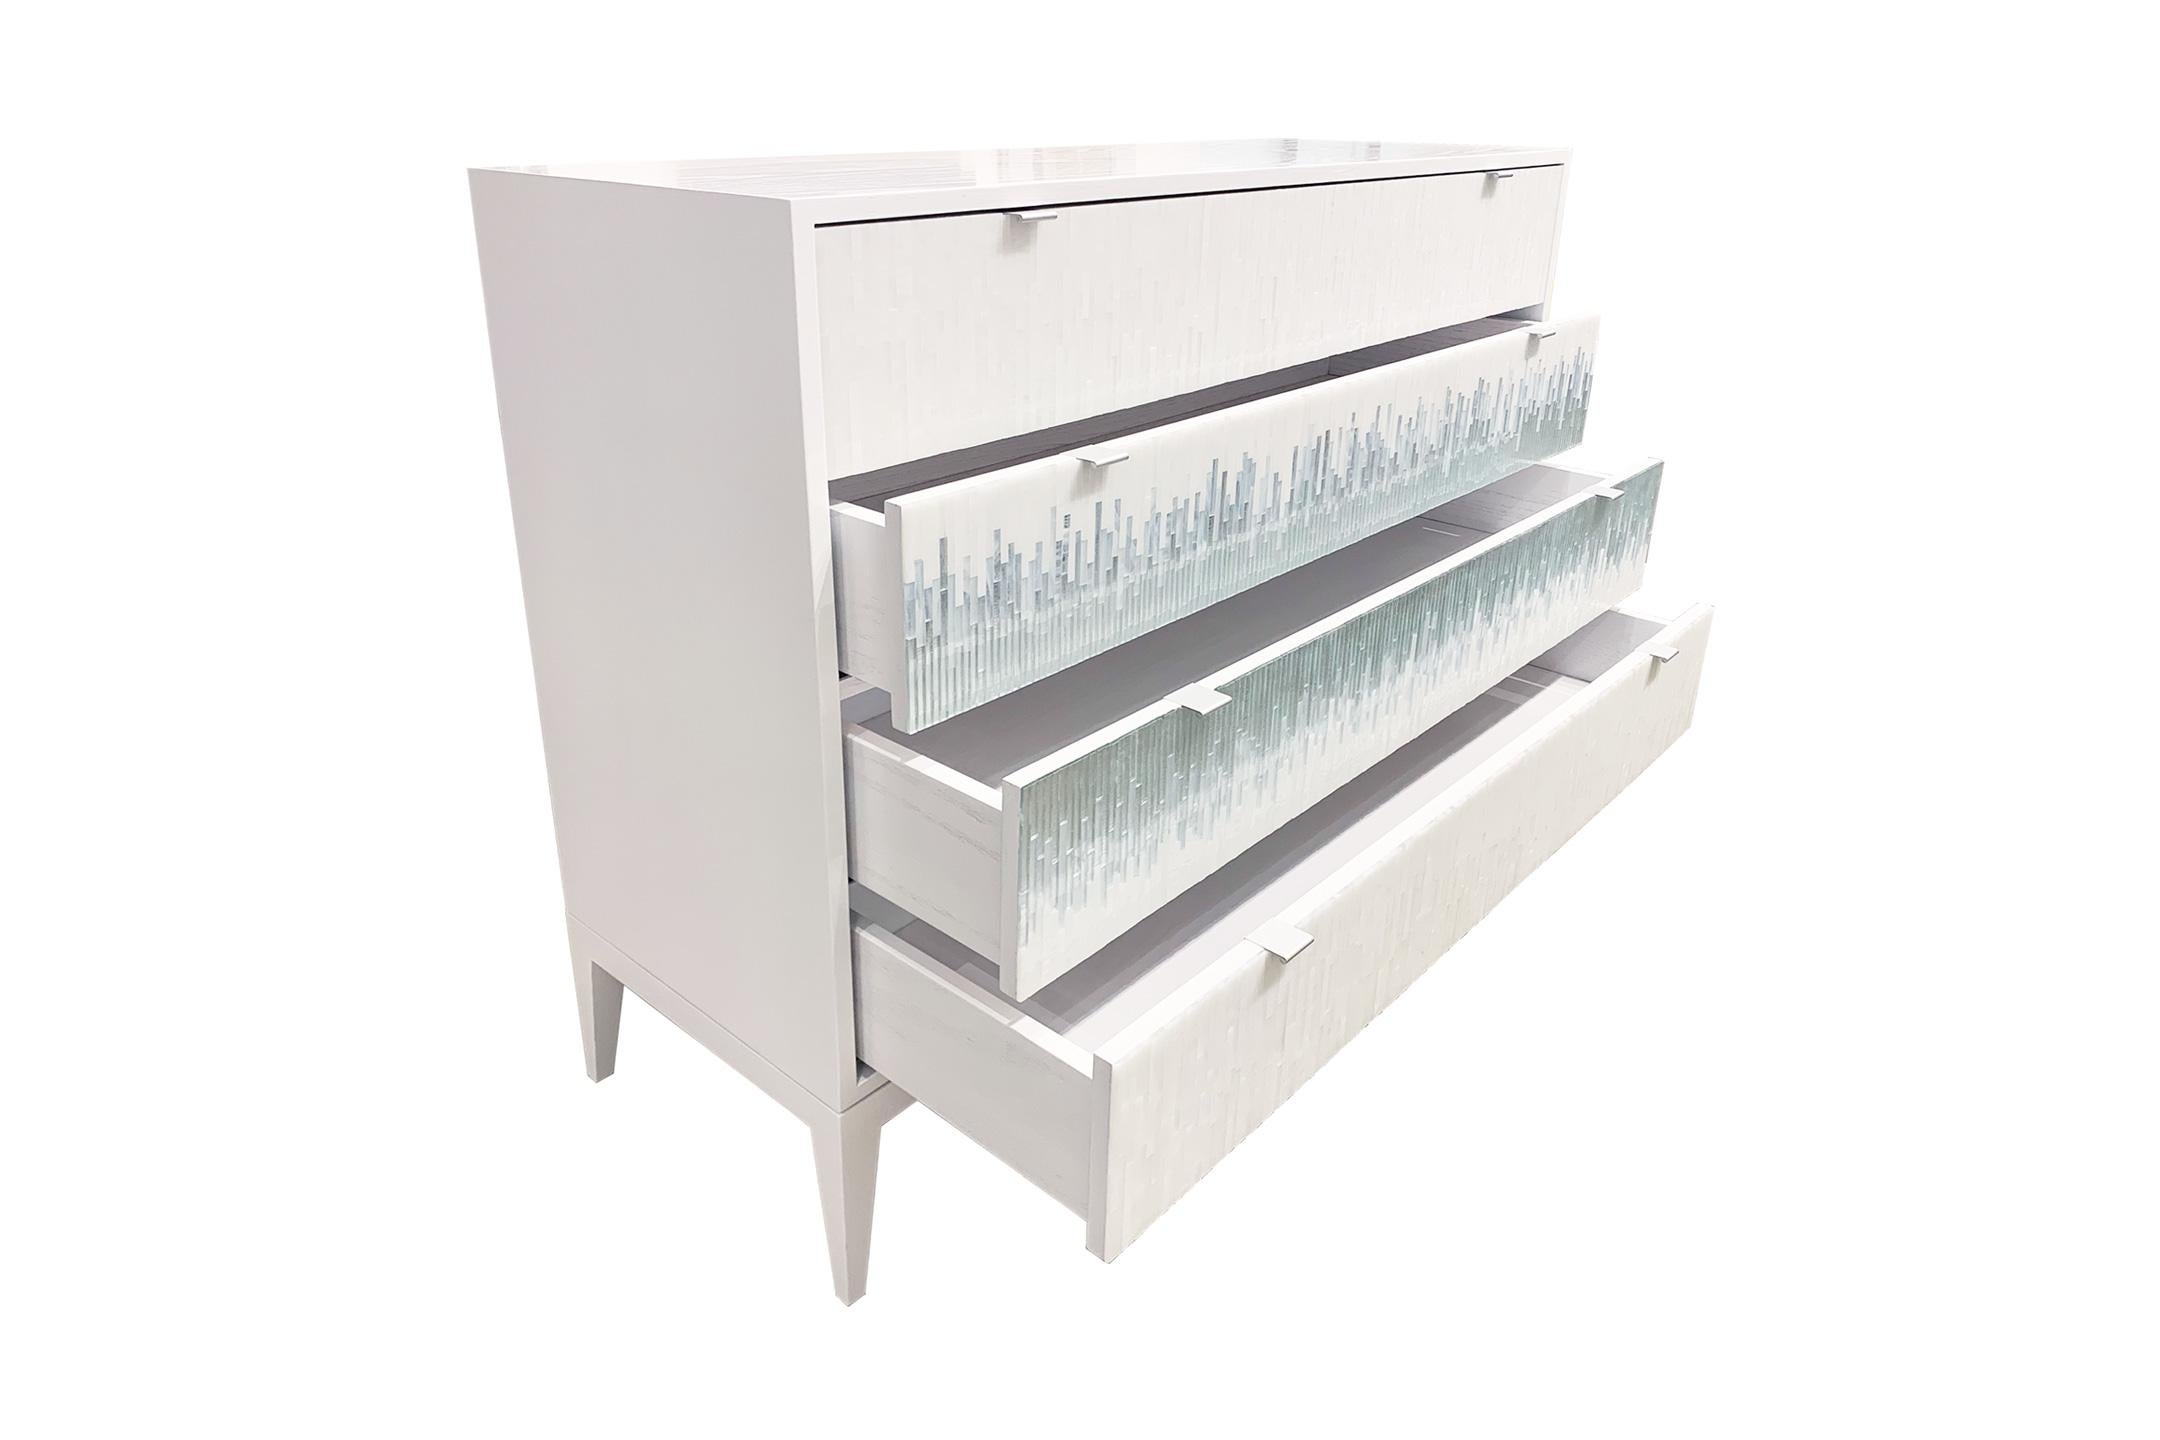 The Milano chest of drawers by Ercole Home has a 4-drawer front, with painted white wood finish on oak. Hand cut glass mosaics in icy white, wispy white silver, and silver decorate the surface in a continuous wave pattern.
There are two metal edge